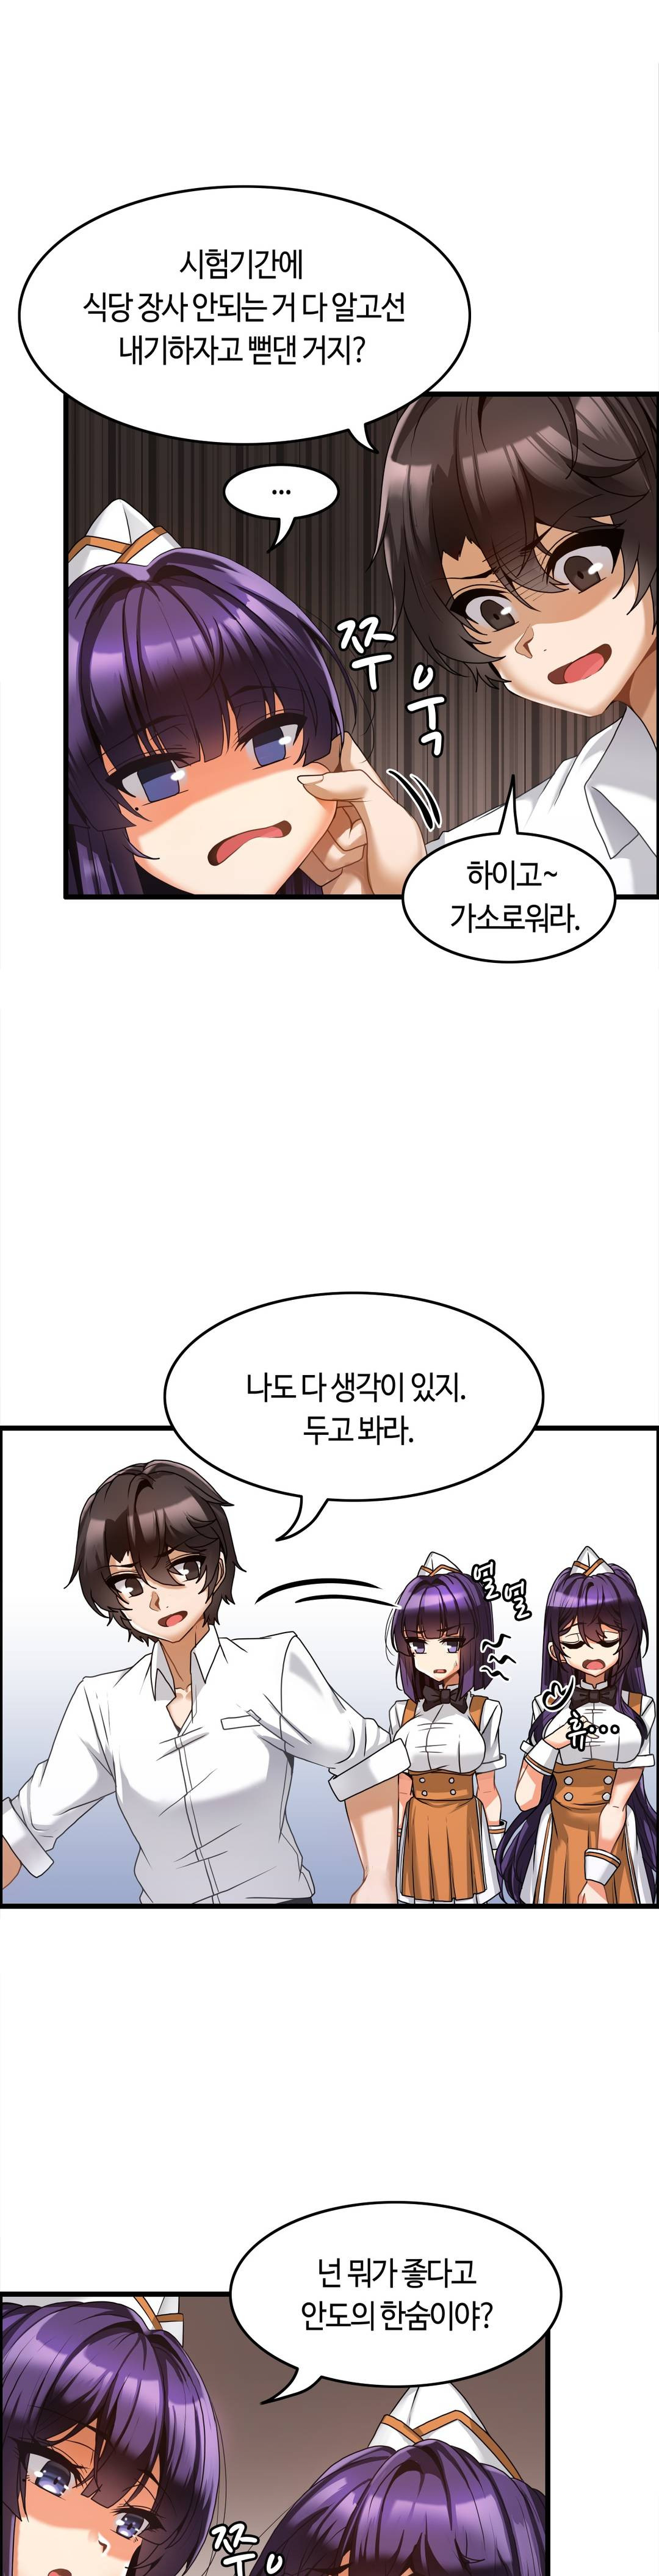 Twin Recipe Raw - Chapter 6 Page 6